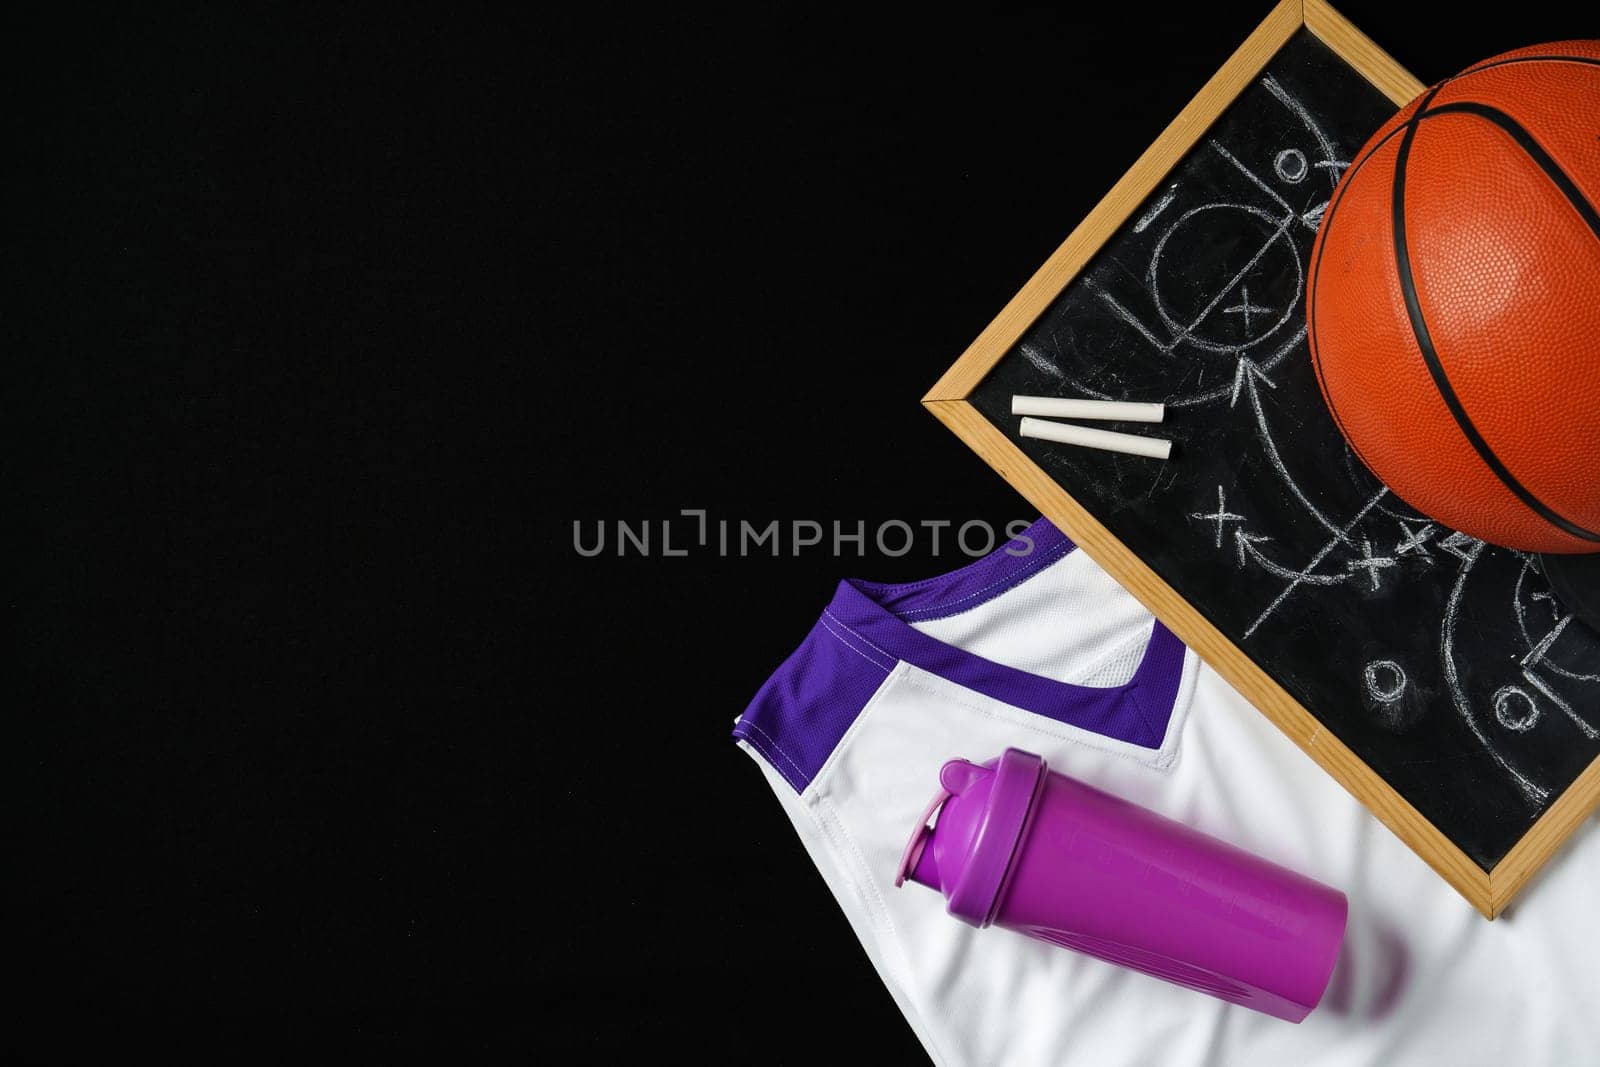 A basketball, along with a strategic play diagrammed on a chalkboard, rests near a folded jersey and a sports bottle. The equipment is arranged on a dark surface, suggesting preparation for a game or a coaching session in progress.